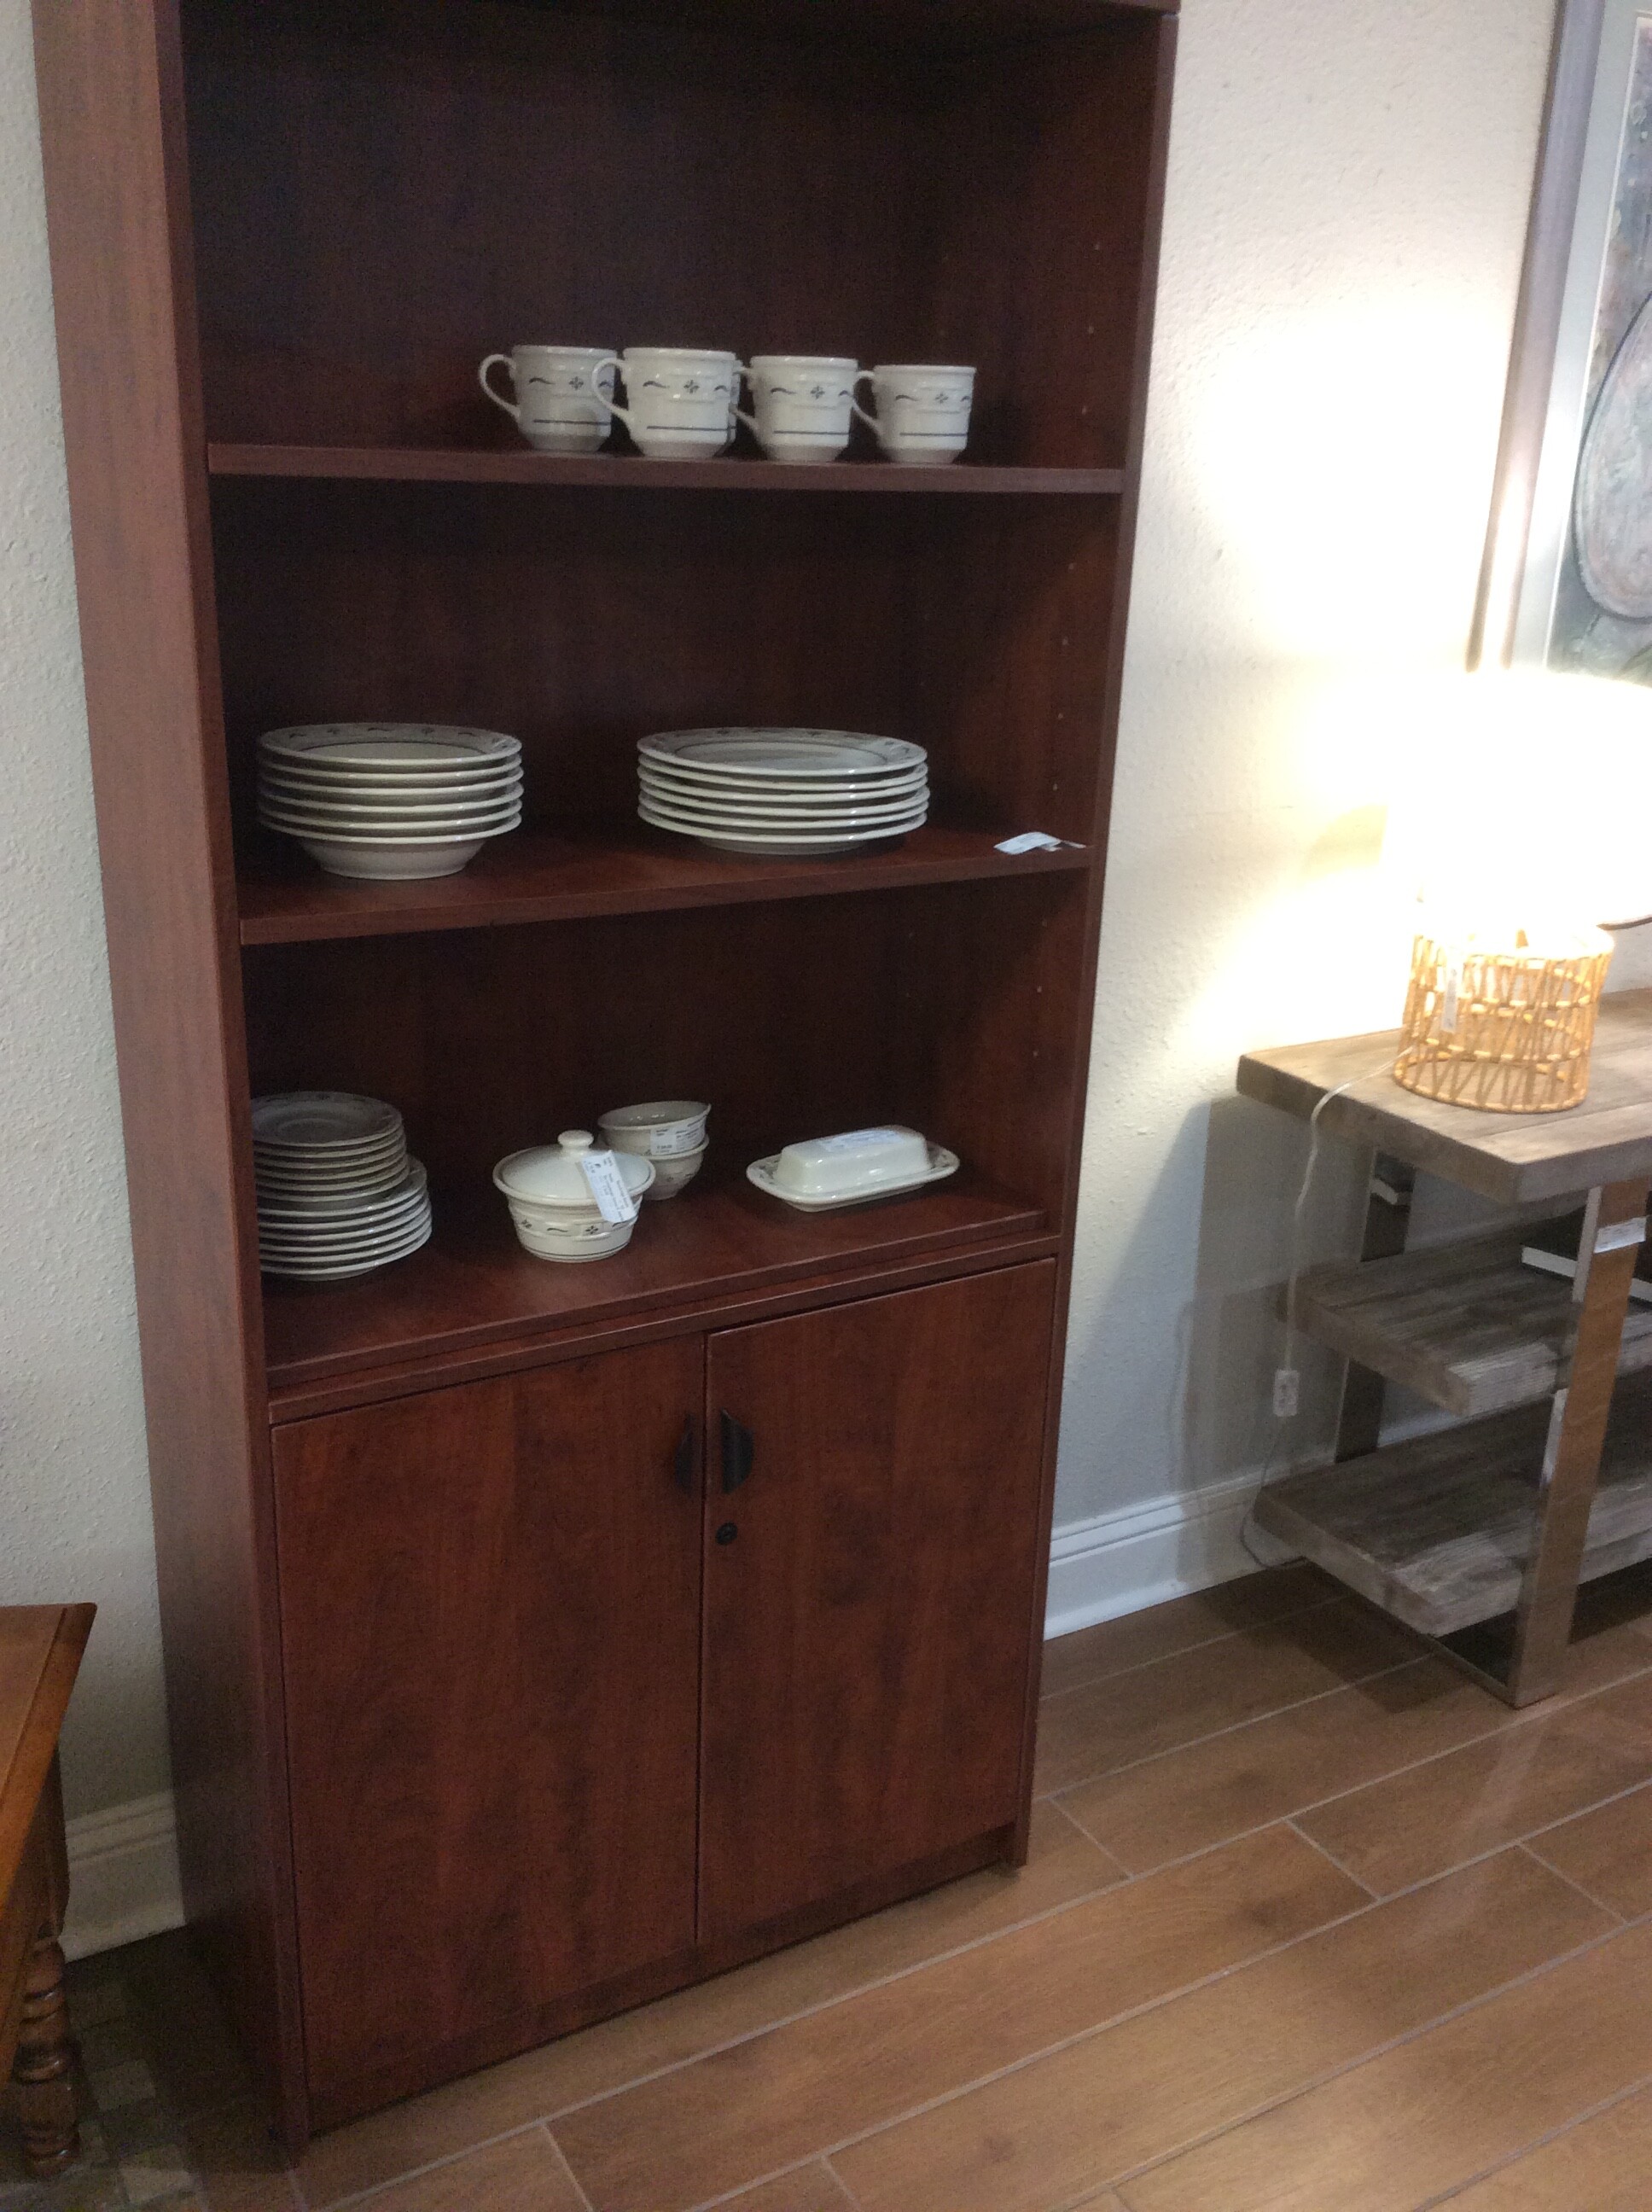 This bookcase has both open and closed storage and is done in a dark wood finish.